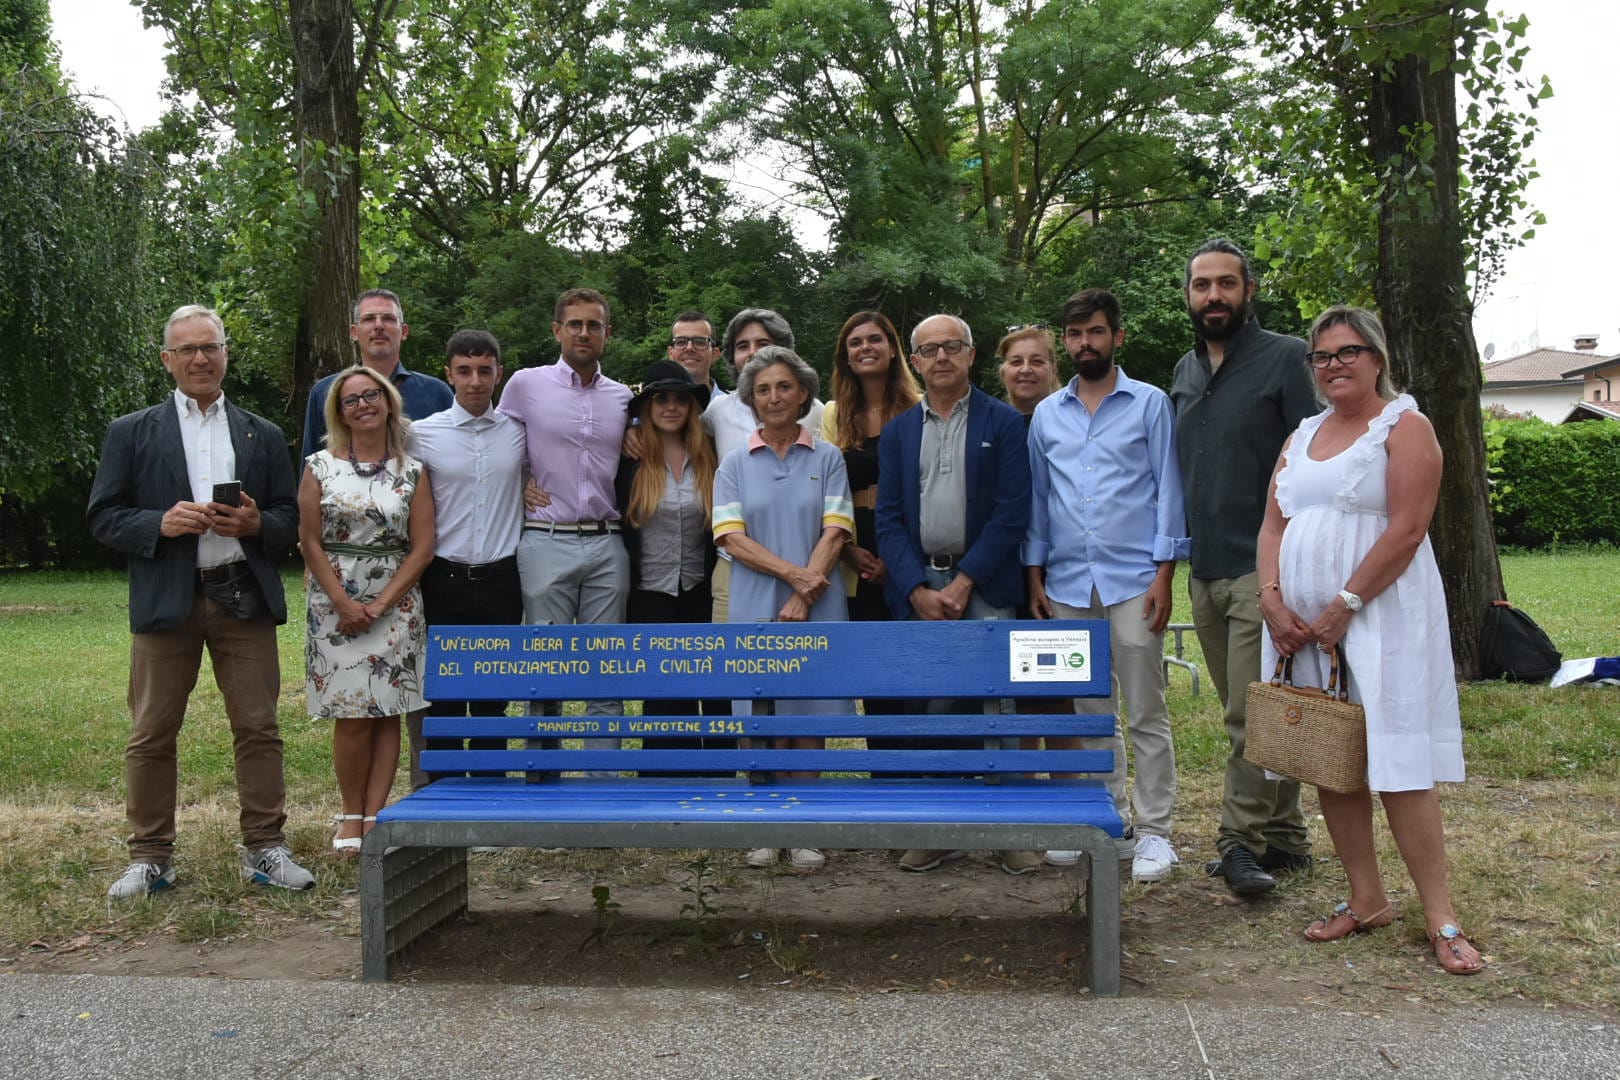 The european bench unveiled at the Albanese park